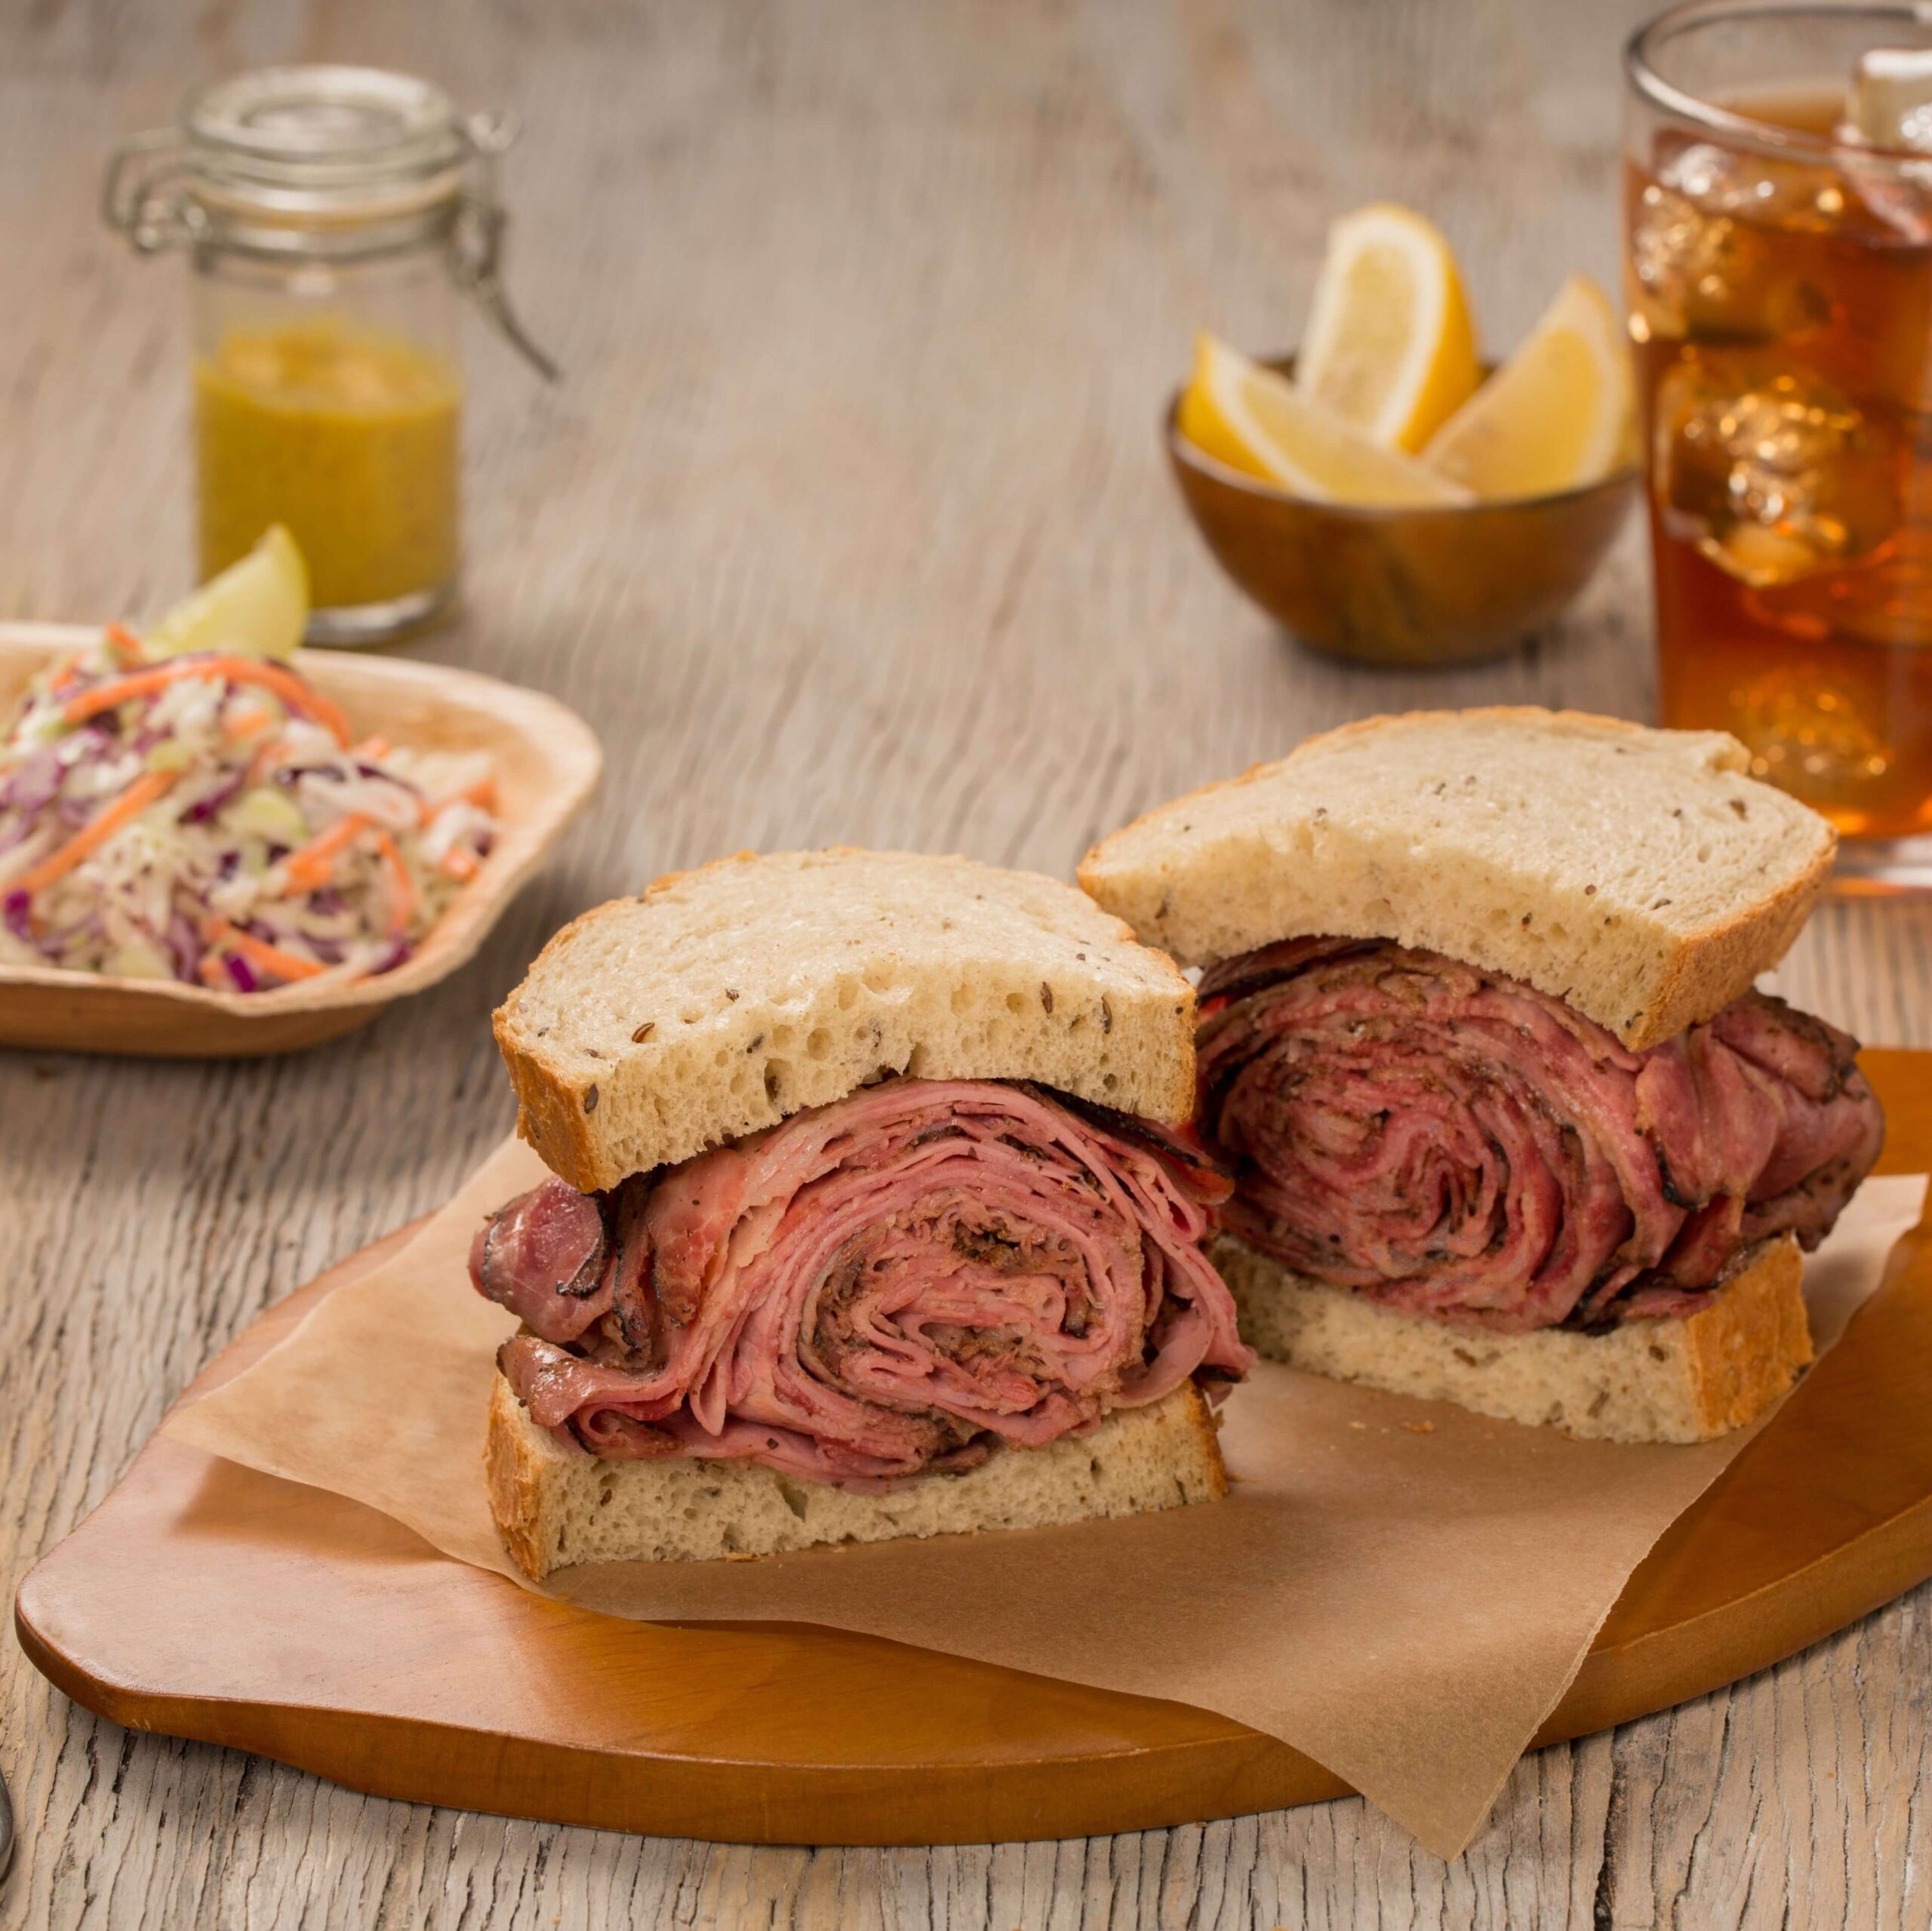 TooJay's Deli • Bakery • Restaurant: A Sandwich Shop and So Much More!